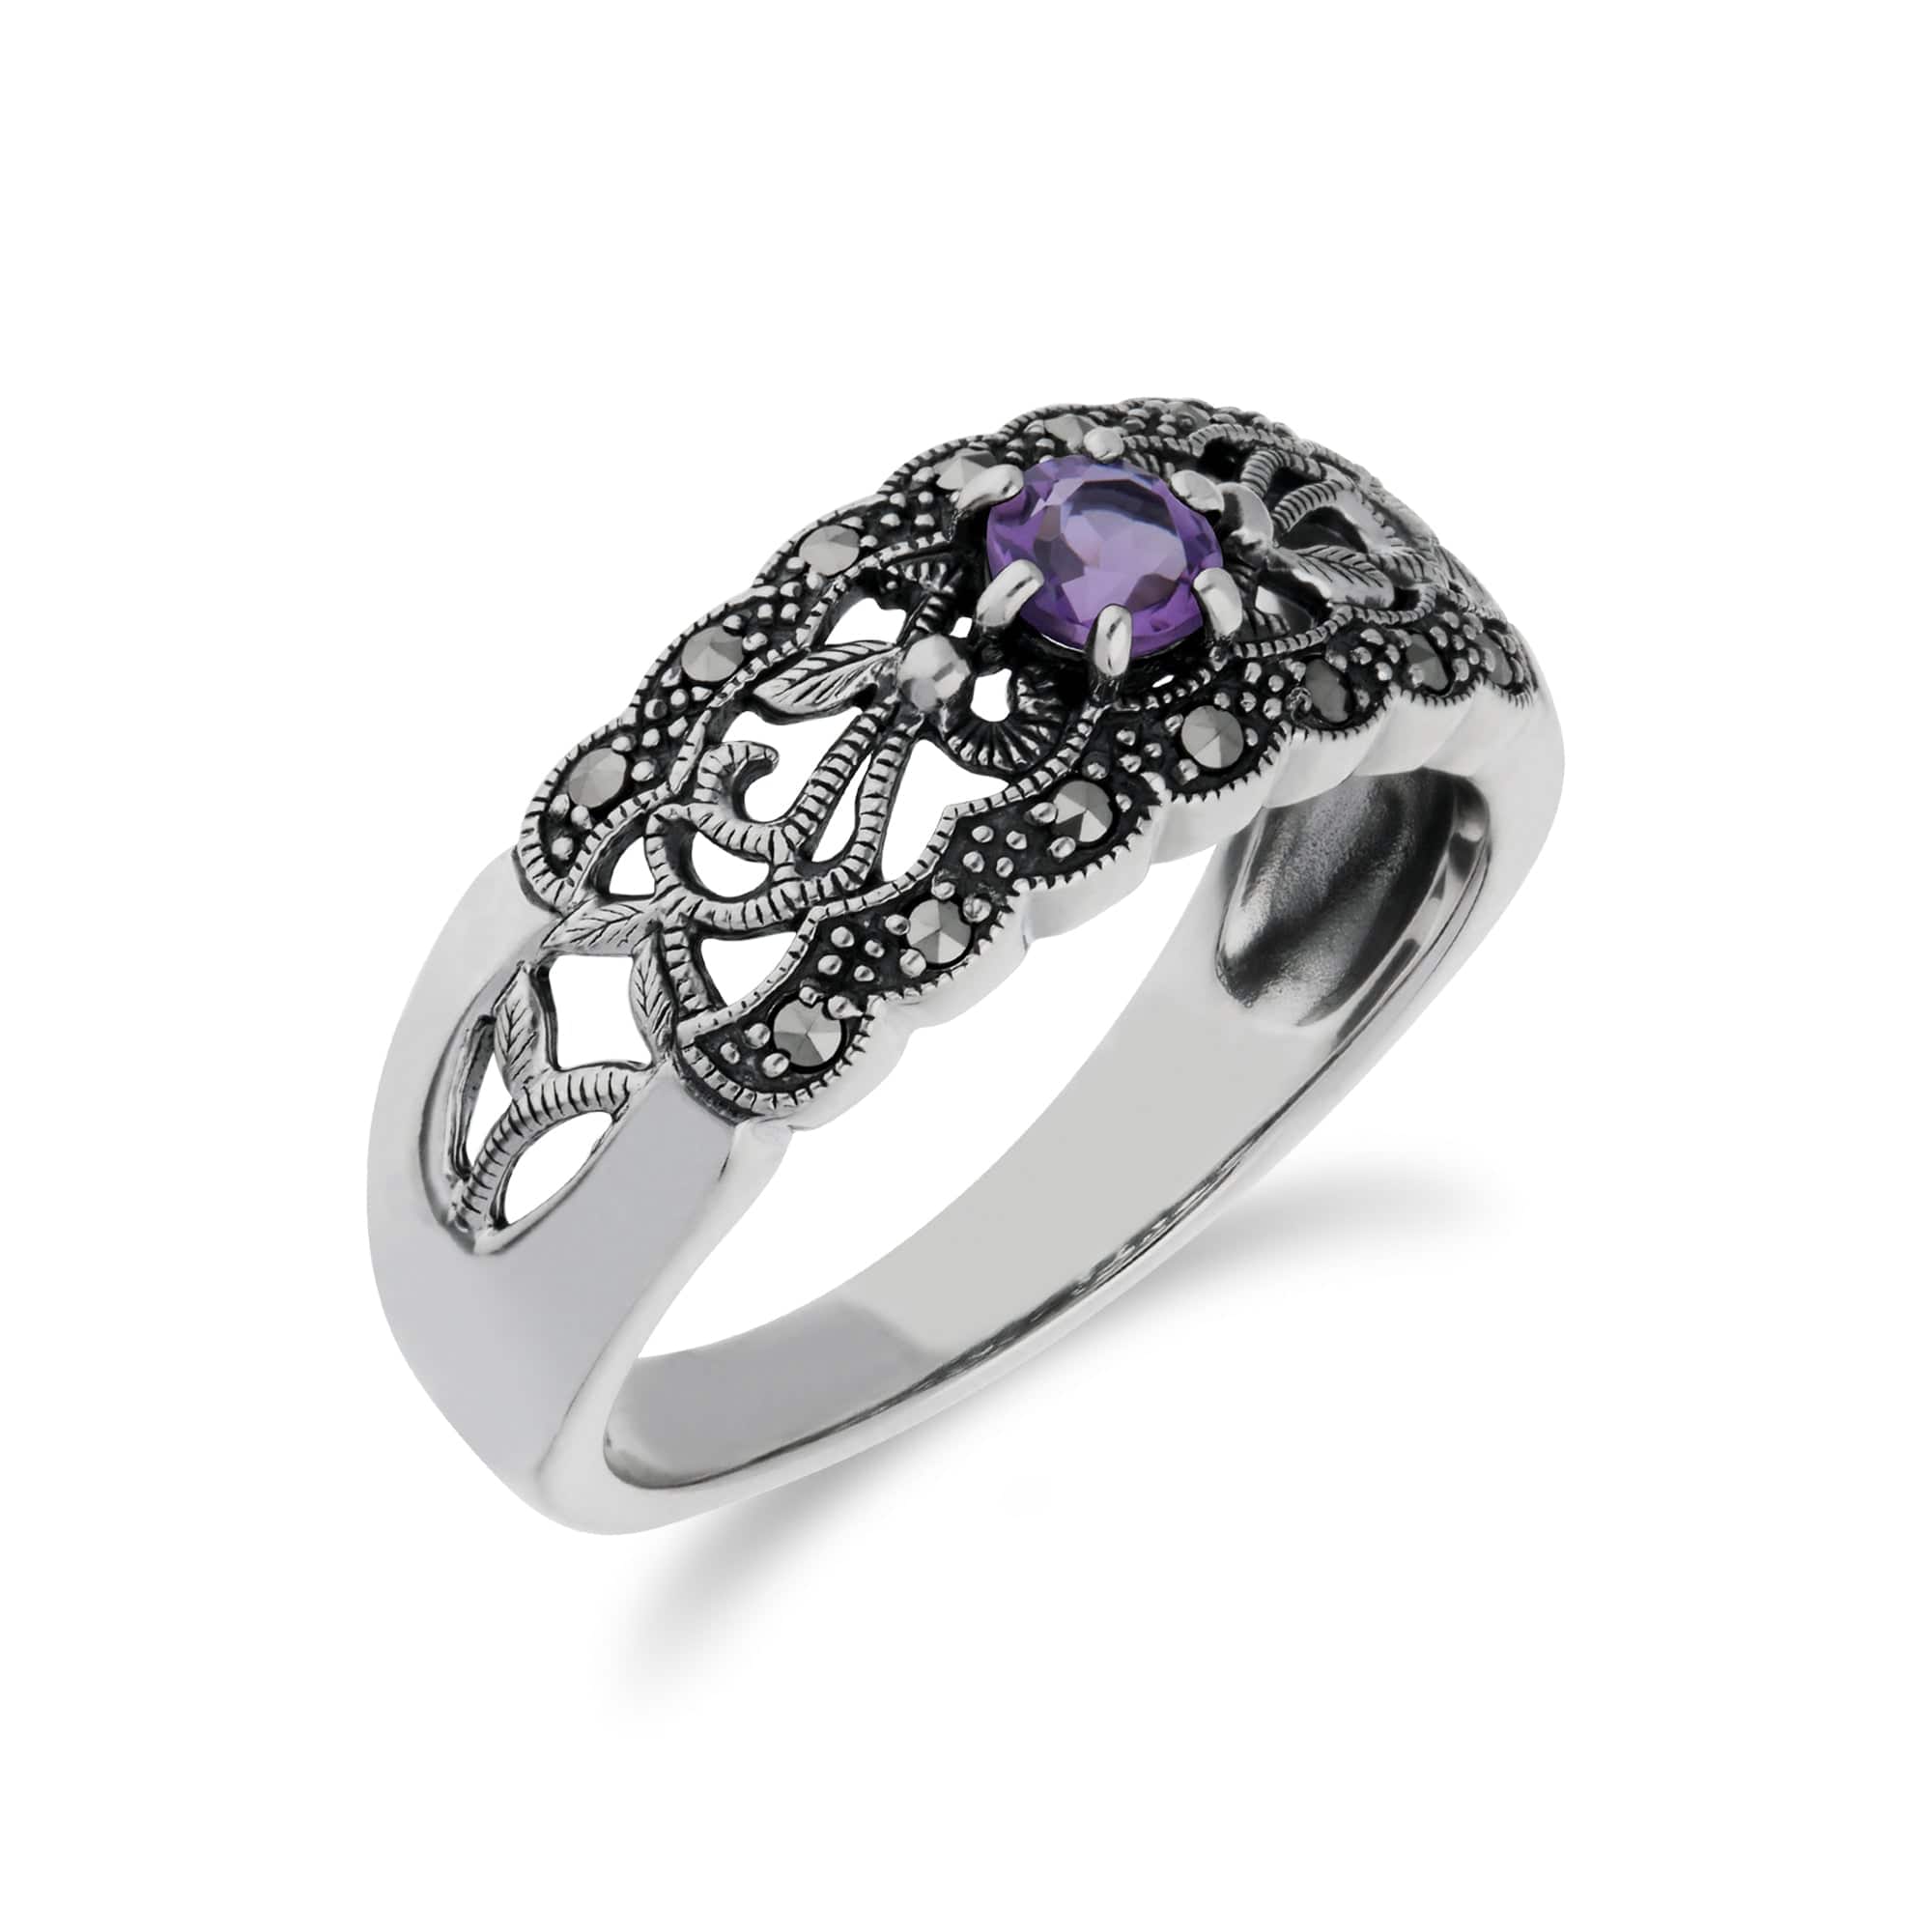 214R597701925 Art Nouveau Style Round Amethyst & Marcasite Floral Band Ring in 925 Sterling Silver 2